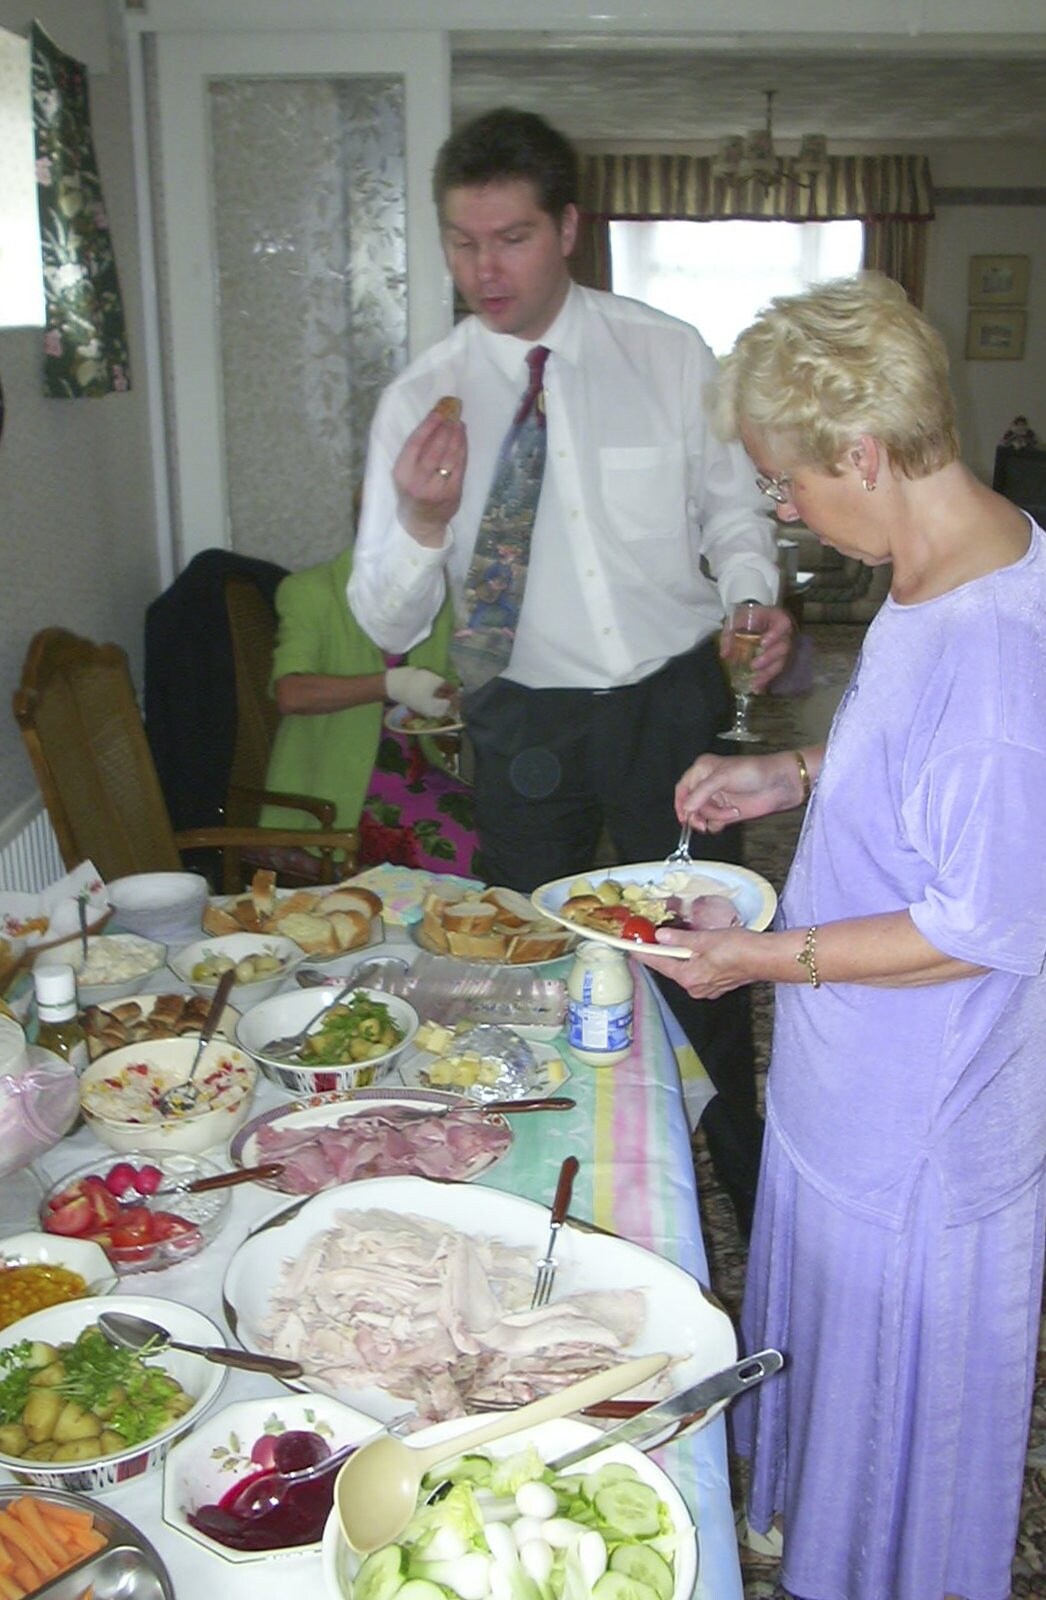 Sean and his mum from Sydney's Christening, Hordle, Hampshire - 4th May 2002